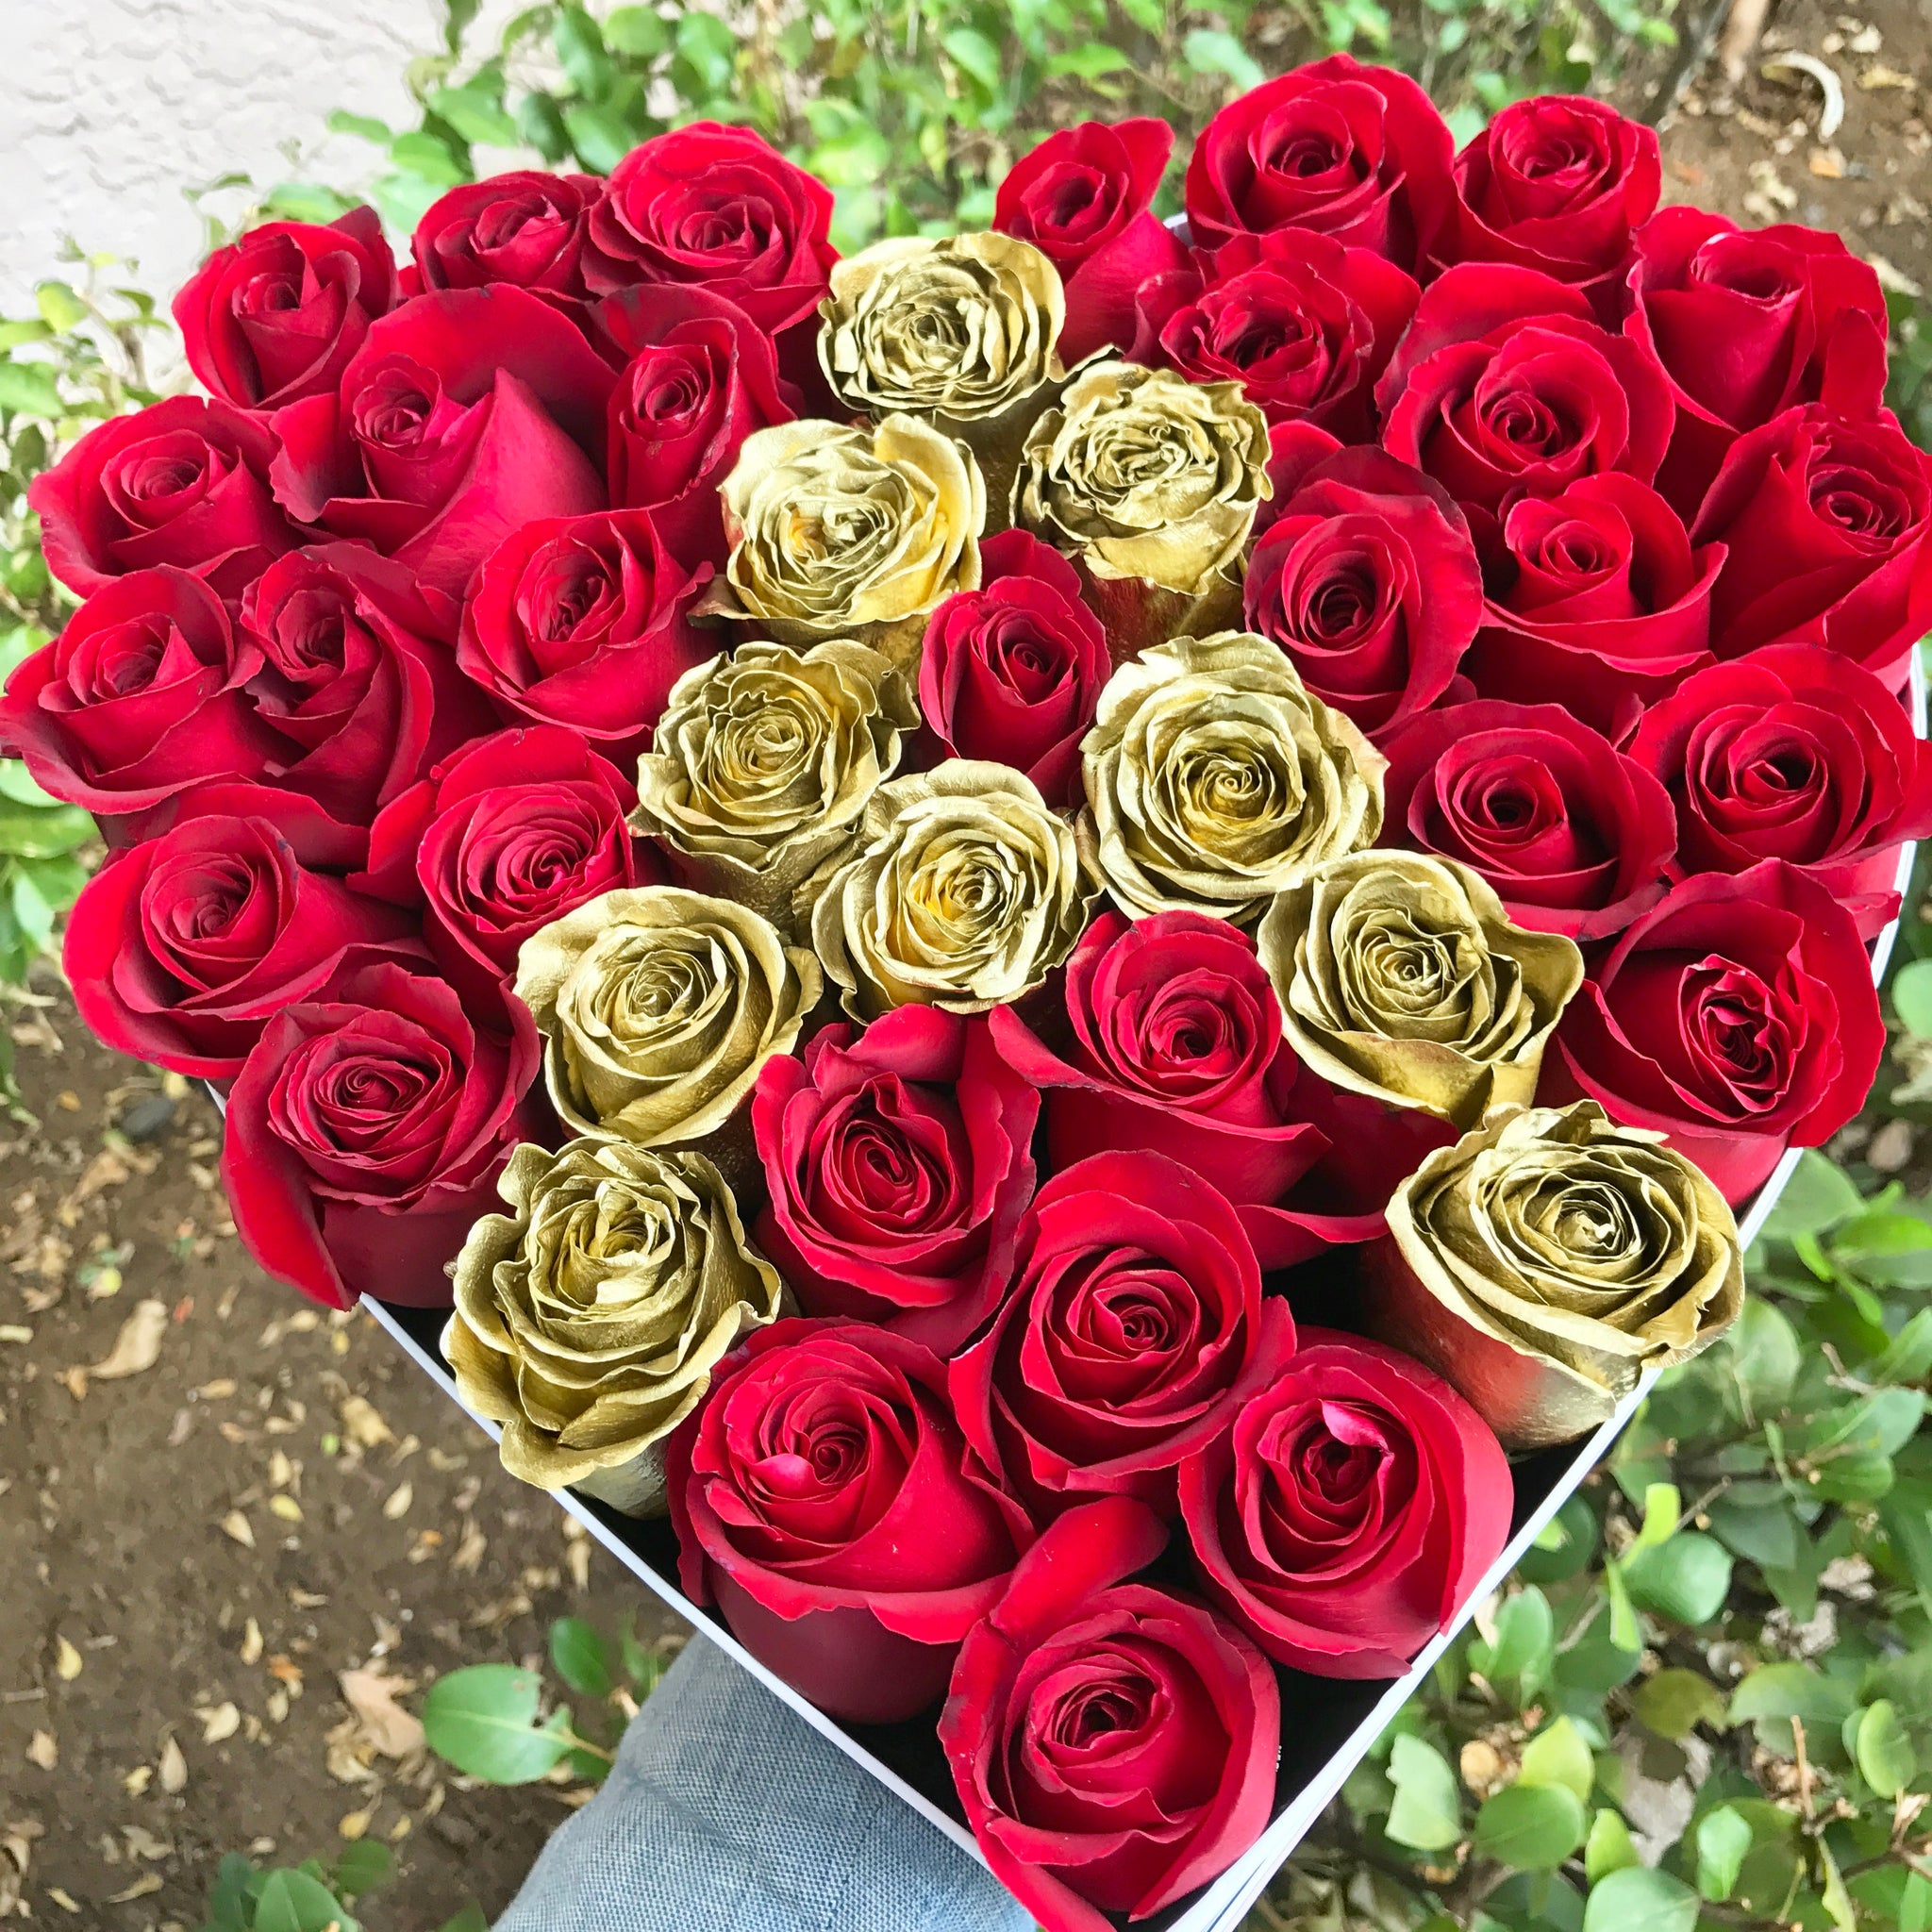 Roses: The Symbol of Love